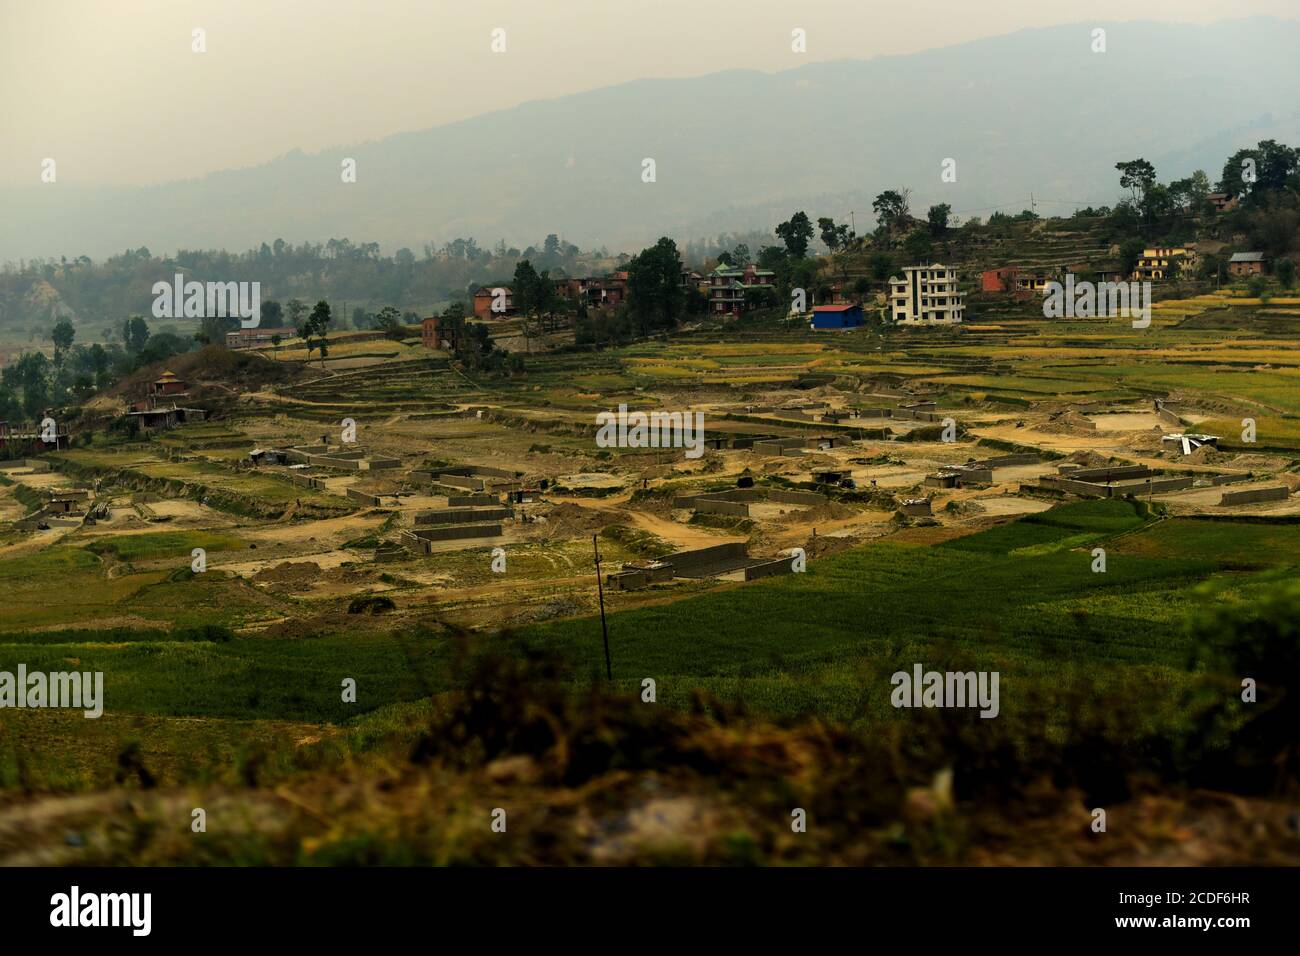 Conversion of agricultural fields into building materials factory on the outskirts of Kathmandu, Nepal. Stock Photo